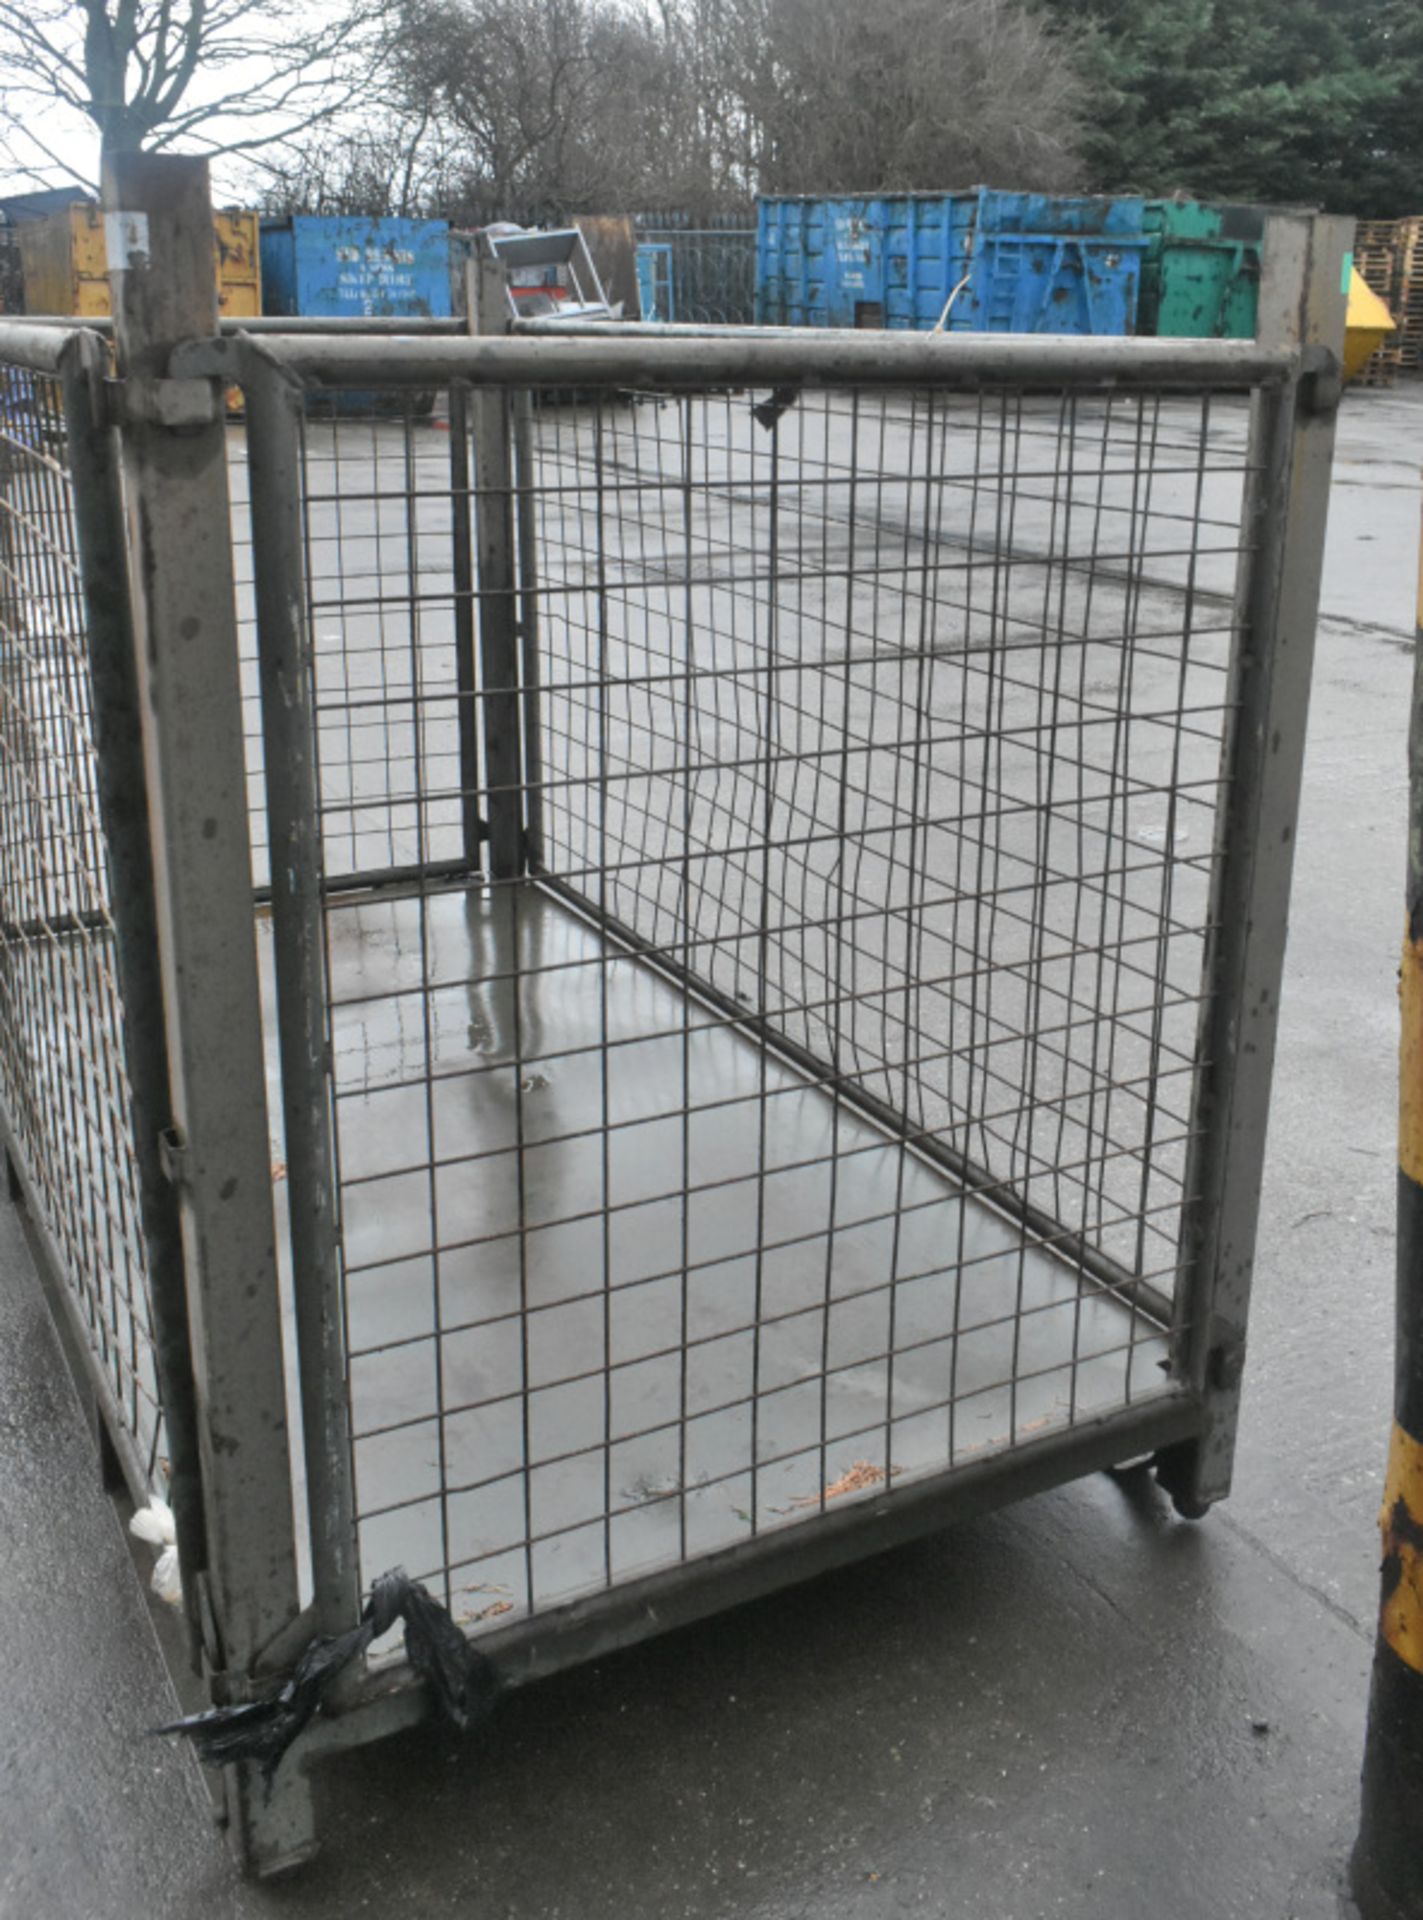 Longspan Metal Stillage - External dimensions L213 x W113 x H143cm - PLEASE SEE PICTURES FOR CONDITI - Image 4 of 4